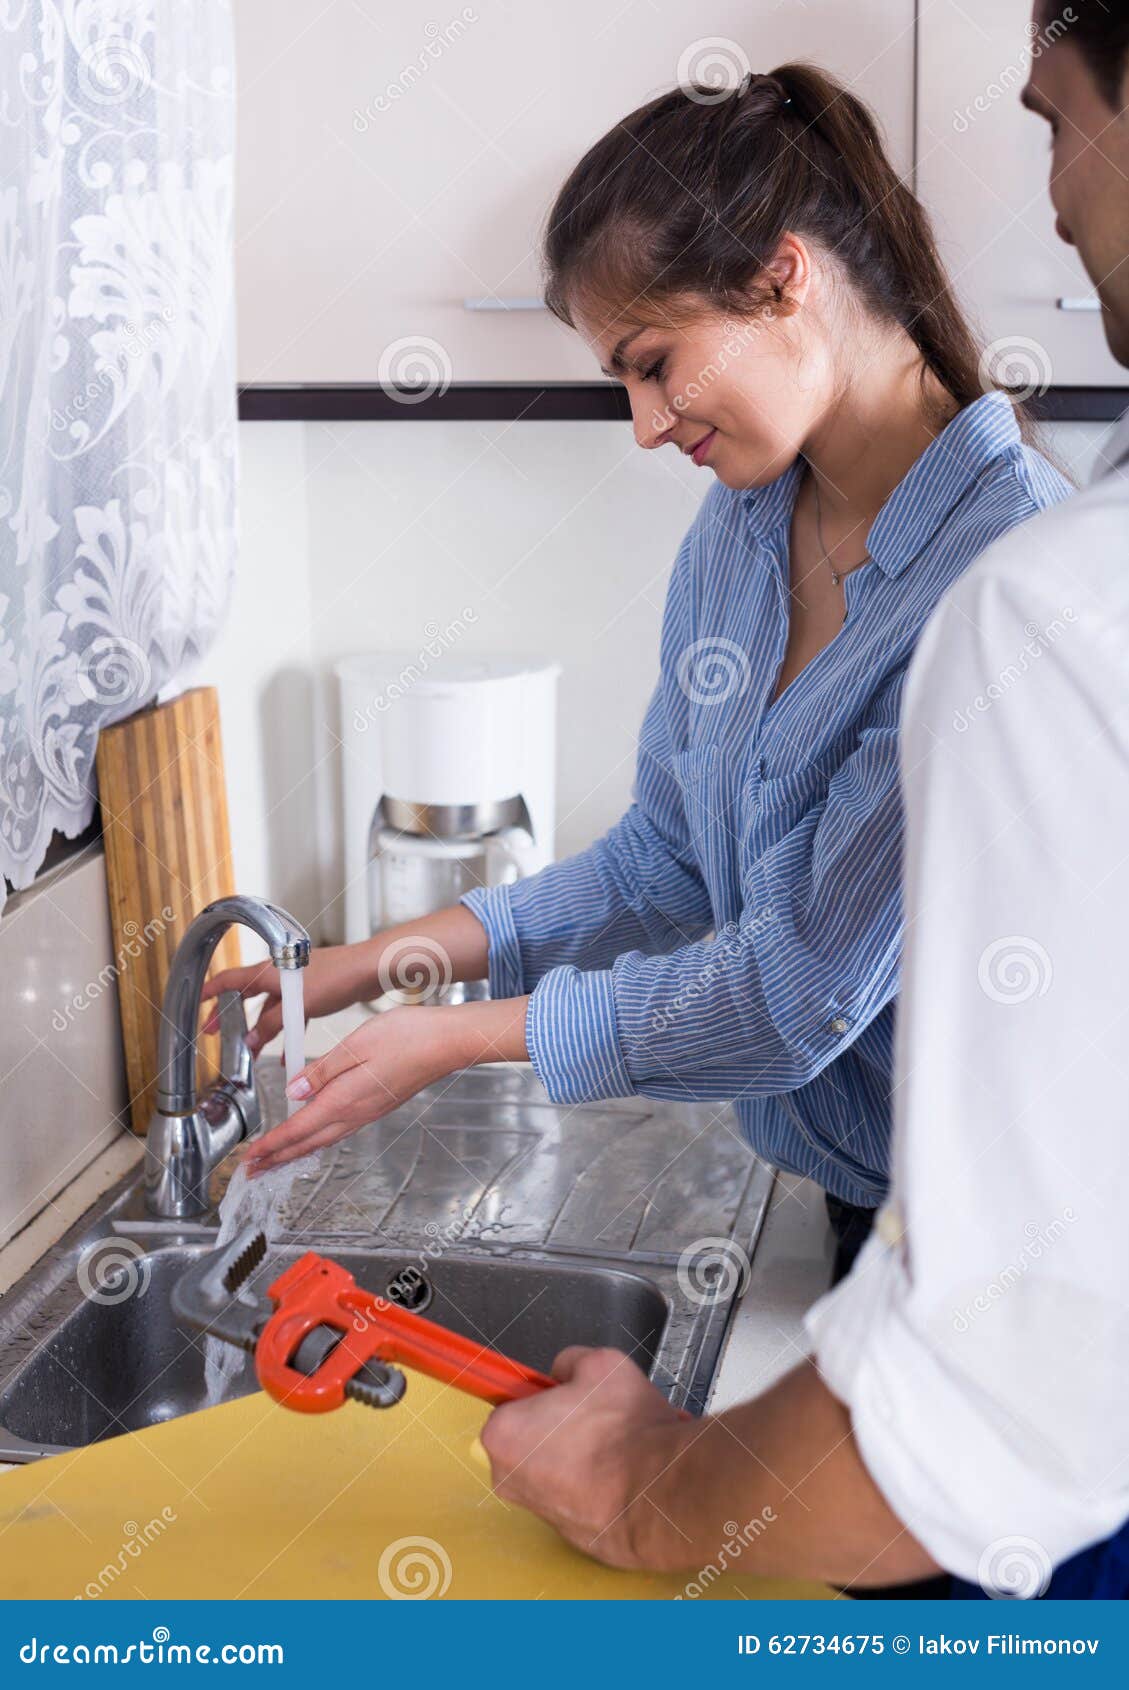 Housewife Called Professional Plumber with Tools To Change Bib image